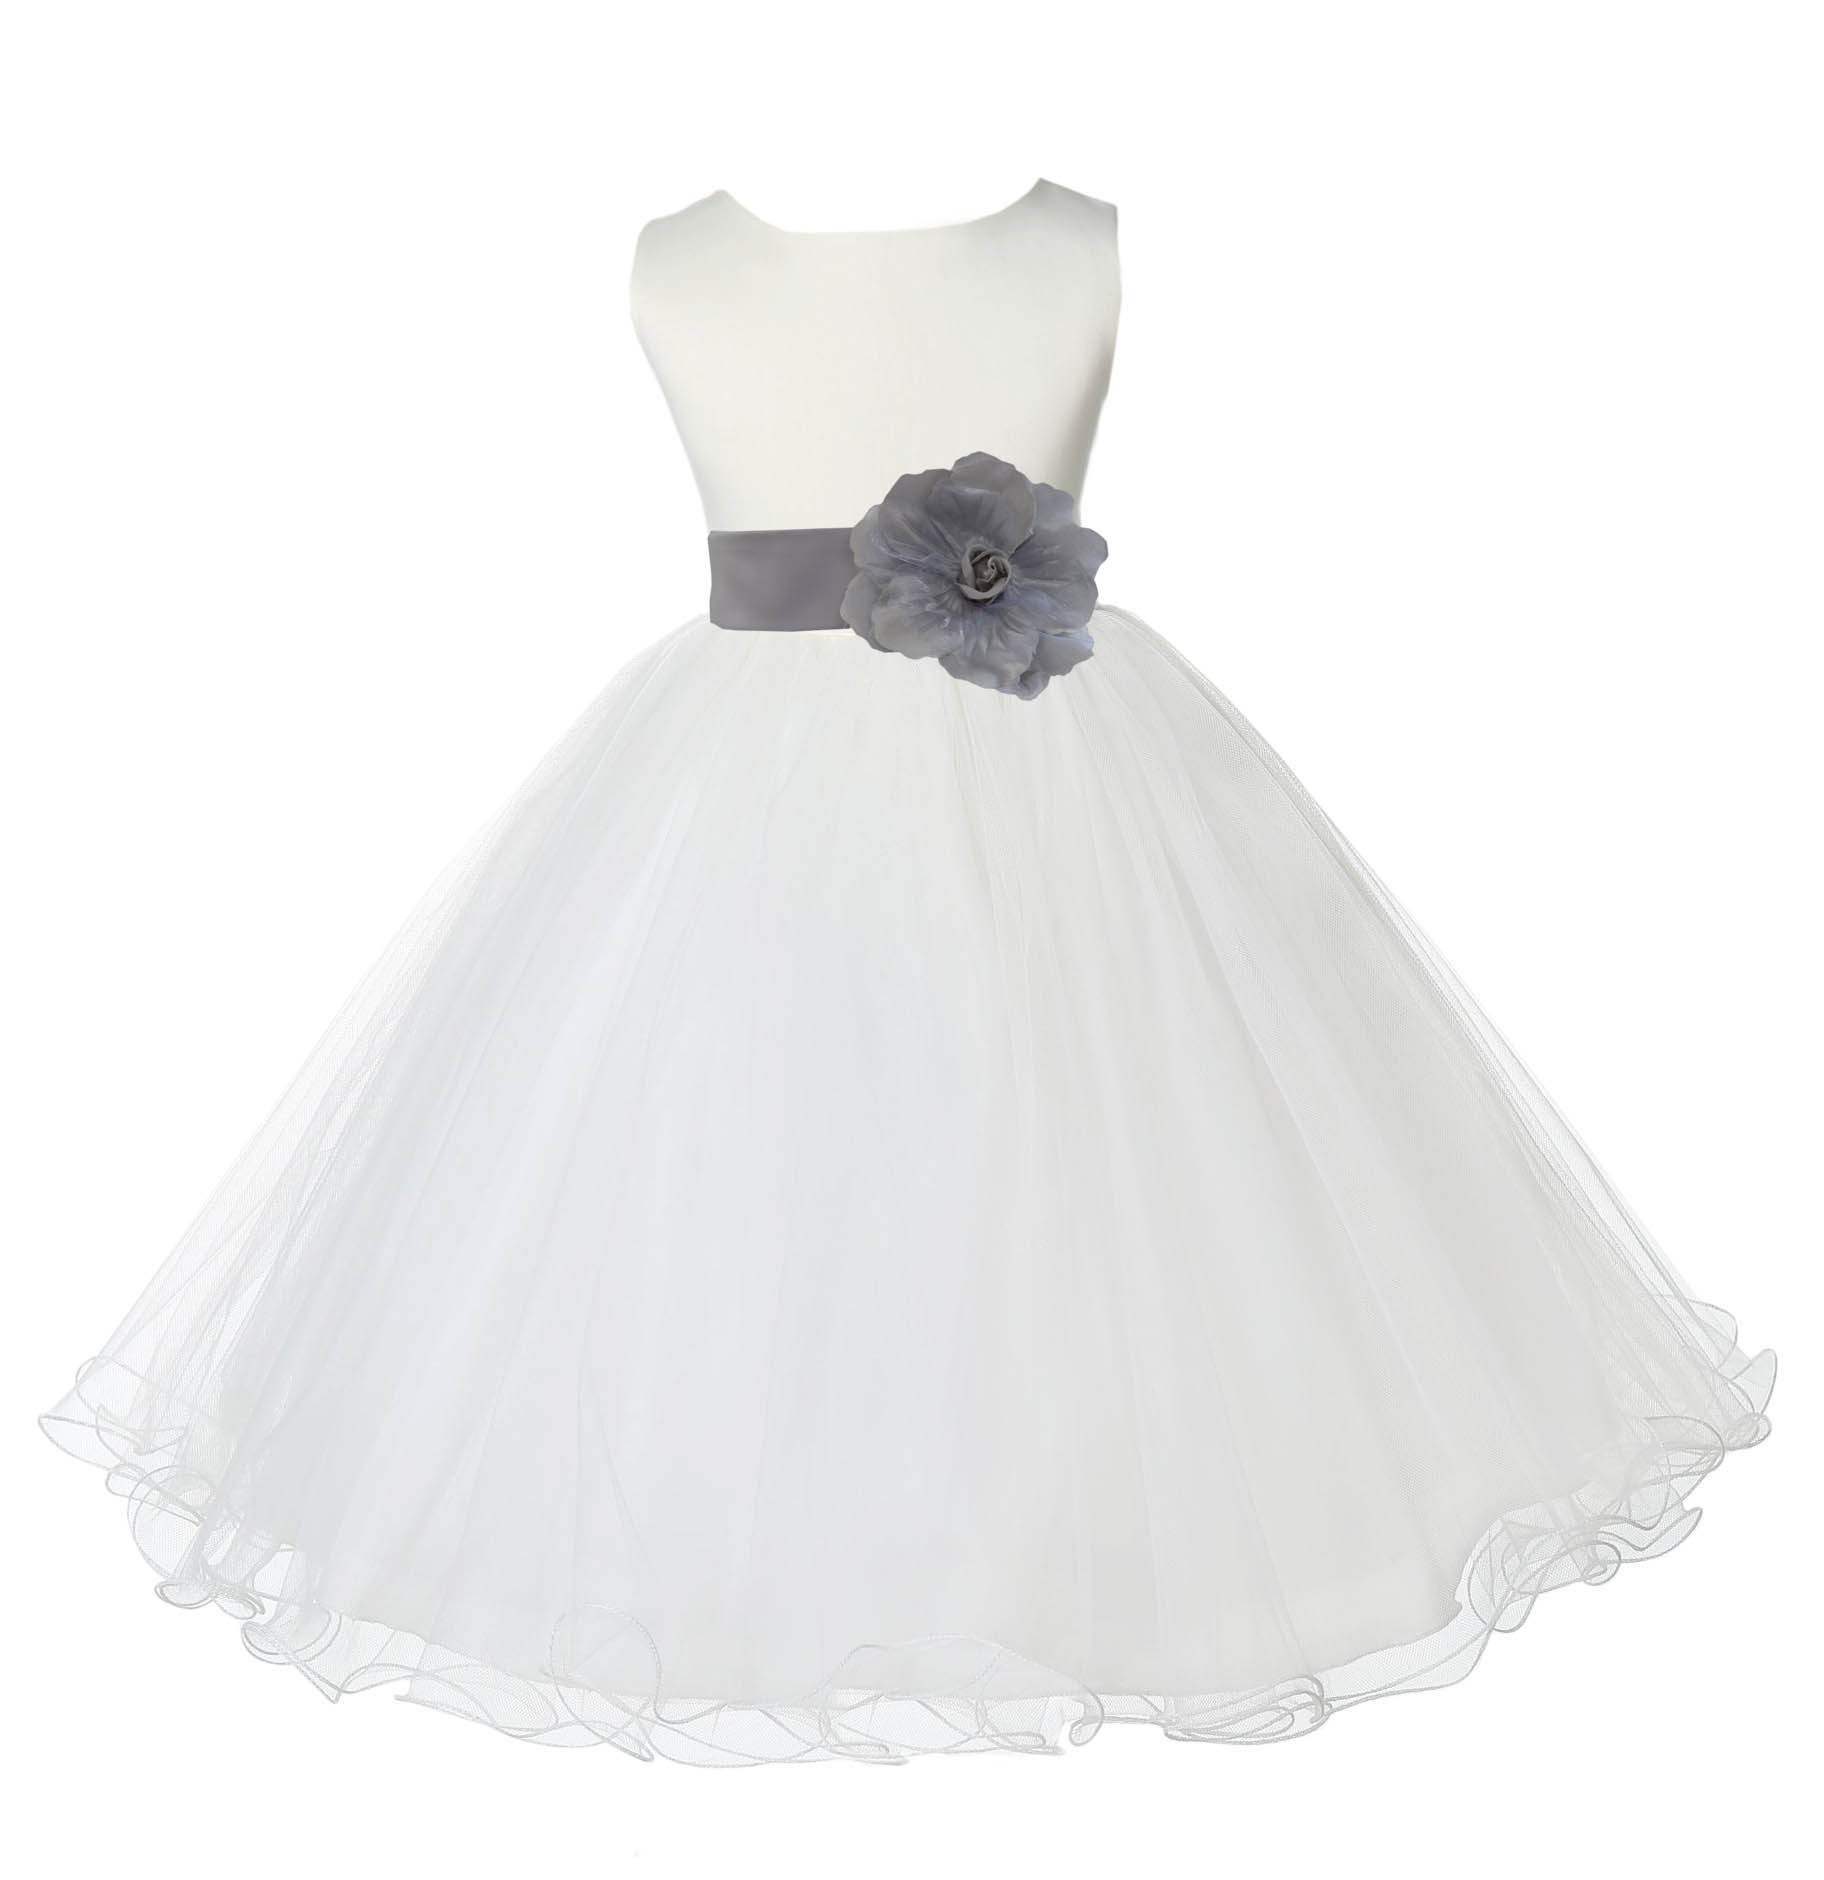 Ivory/Silver Tulle Rattail Edge Flower Girl Dress Pageant Recital 829S